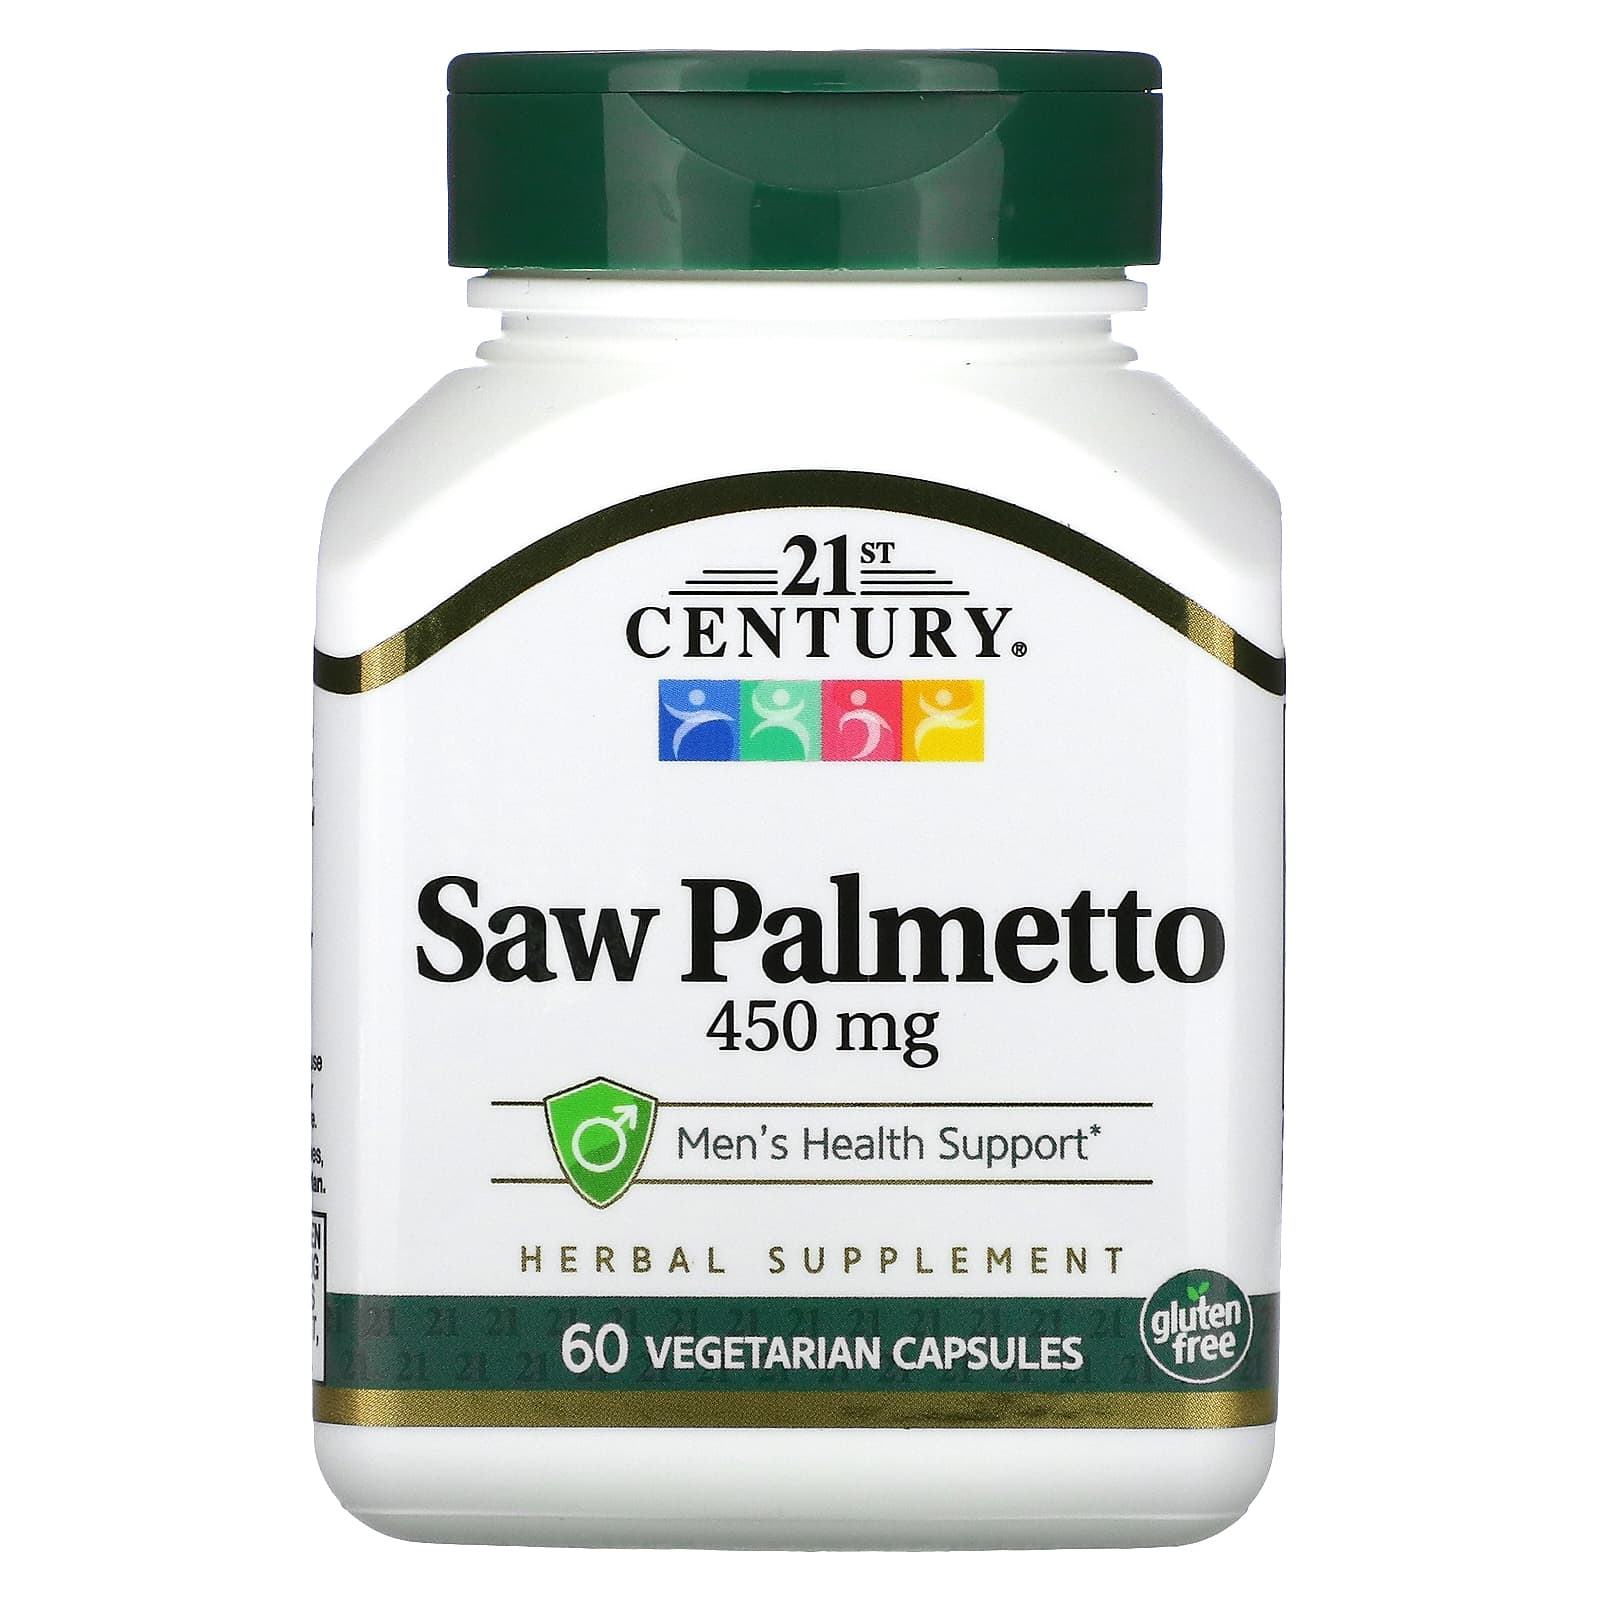 21st Century Saw Palmetto 450 mg capsules prostate health supporter - 60 Vegetarian Capsules